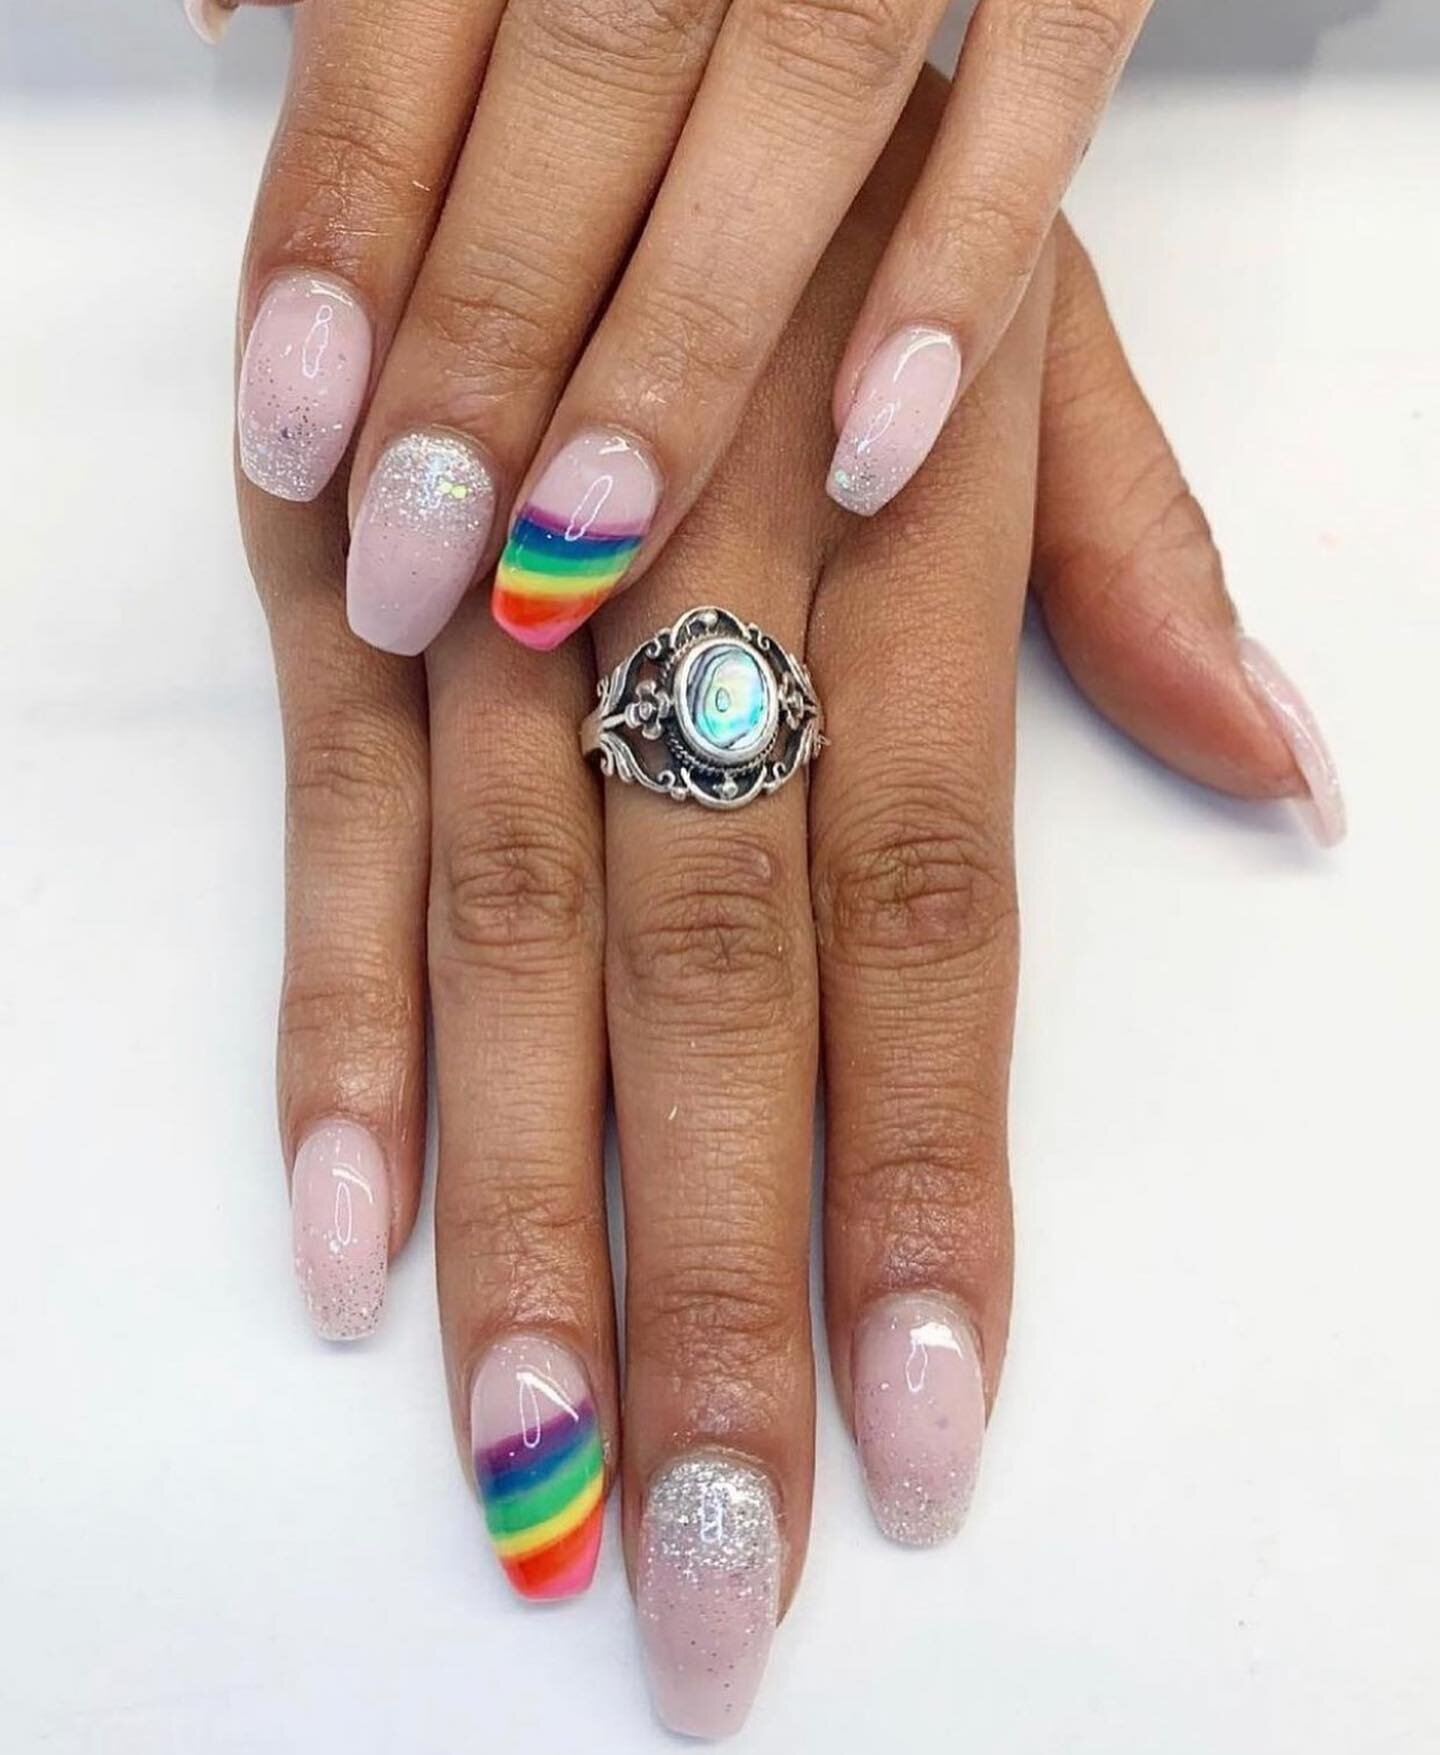 What an amazing day at NG today!🌈So many beauty Nail Garden designs⭐️ Ready for you again tomorrow xo #nailgarden #nails #mani #manicure #pretty #rainbow #spring #summer #june #cute #spa #salon #instanails #nailgame #gelnails